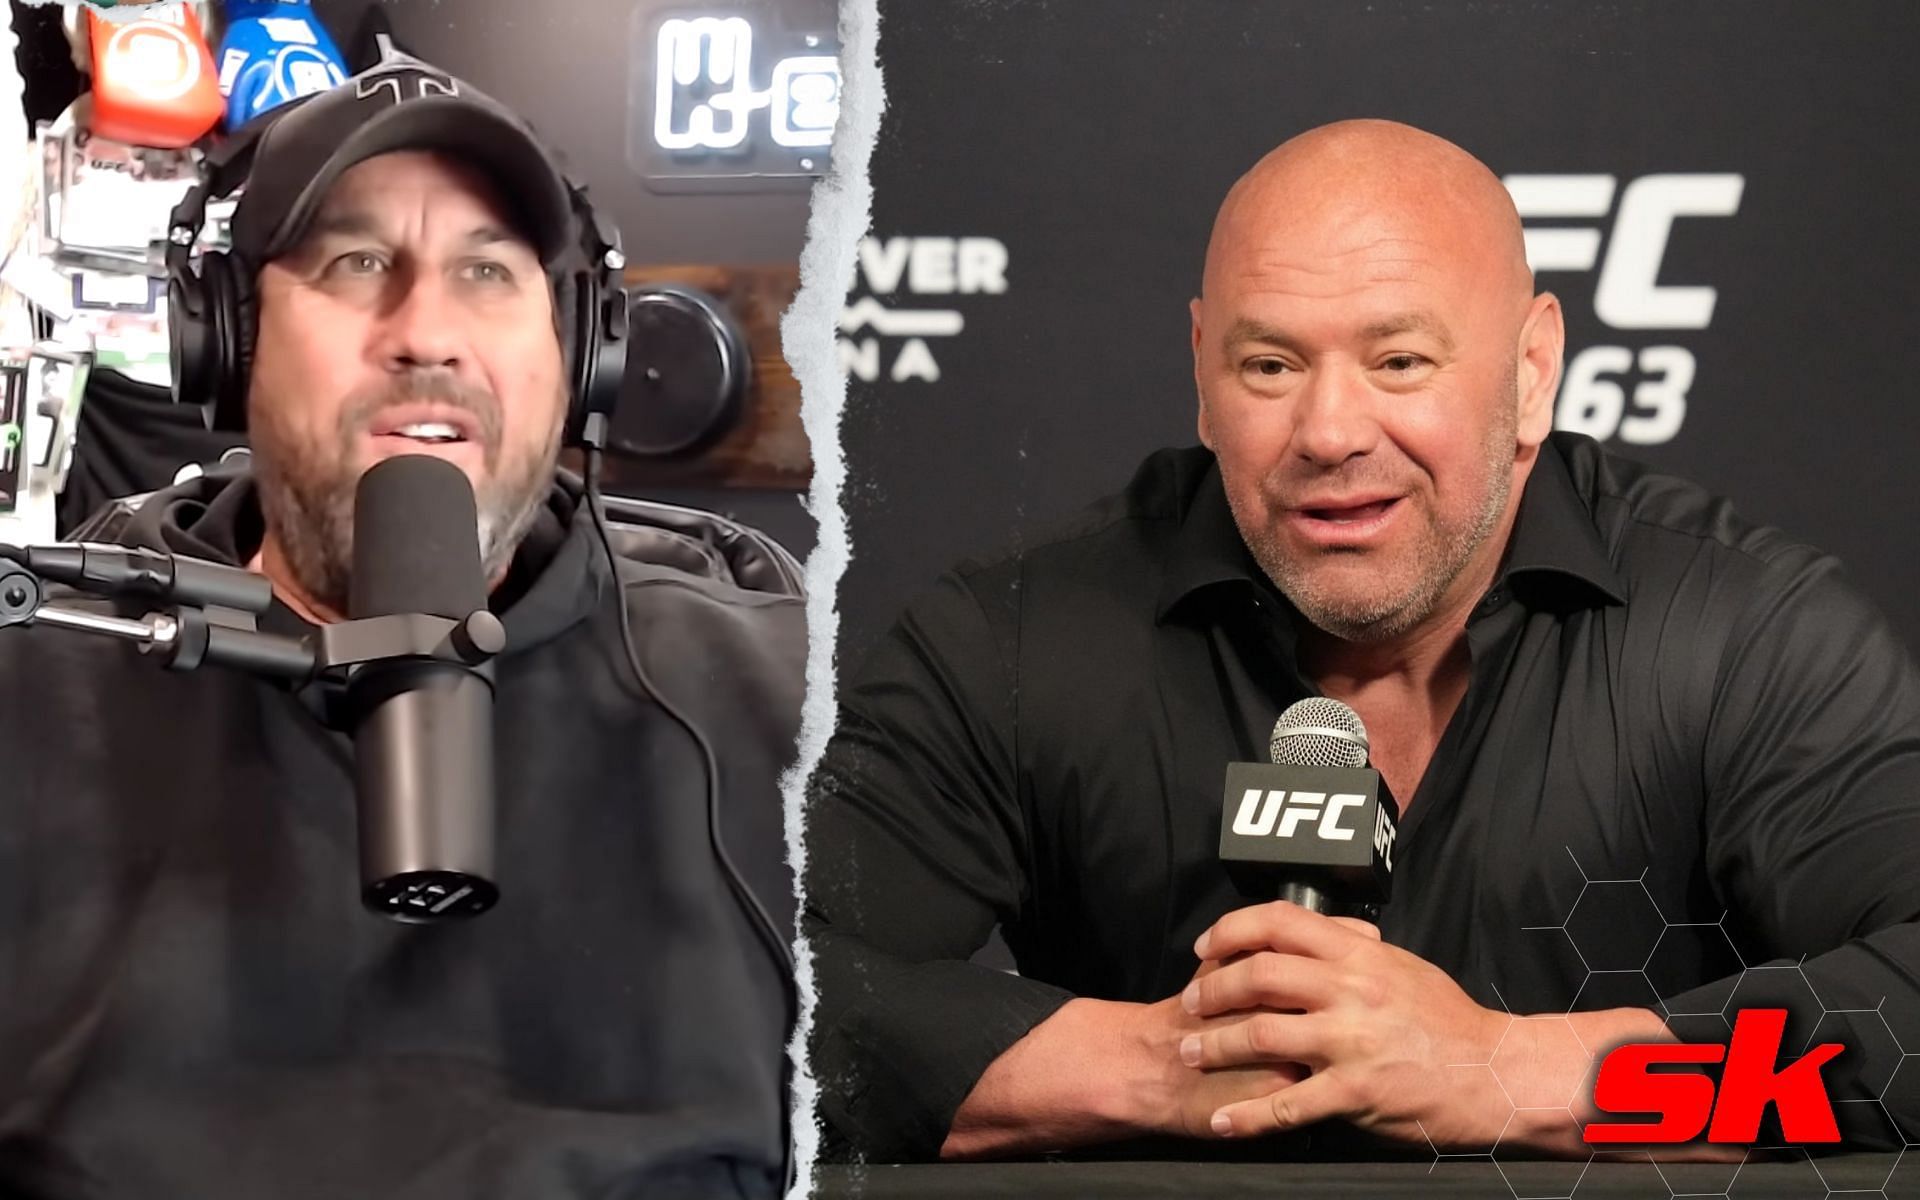 John McCarthy details why Dana White and the UFC will never do a cross-promotional event. [Image credits: YouTubeWeighingIn; Getty Images]